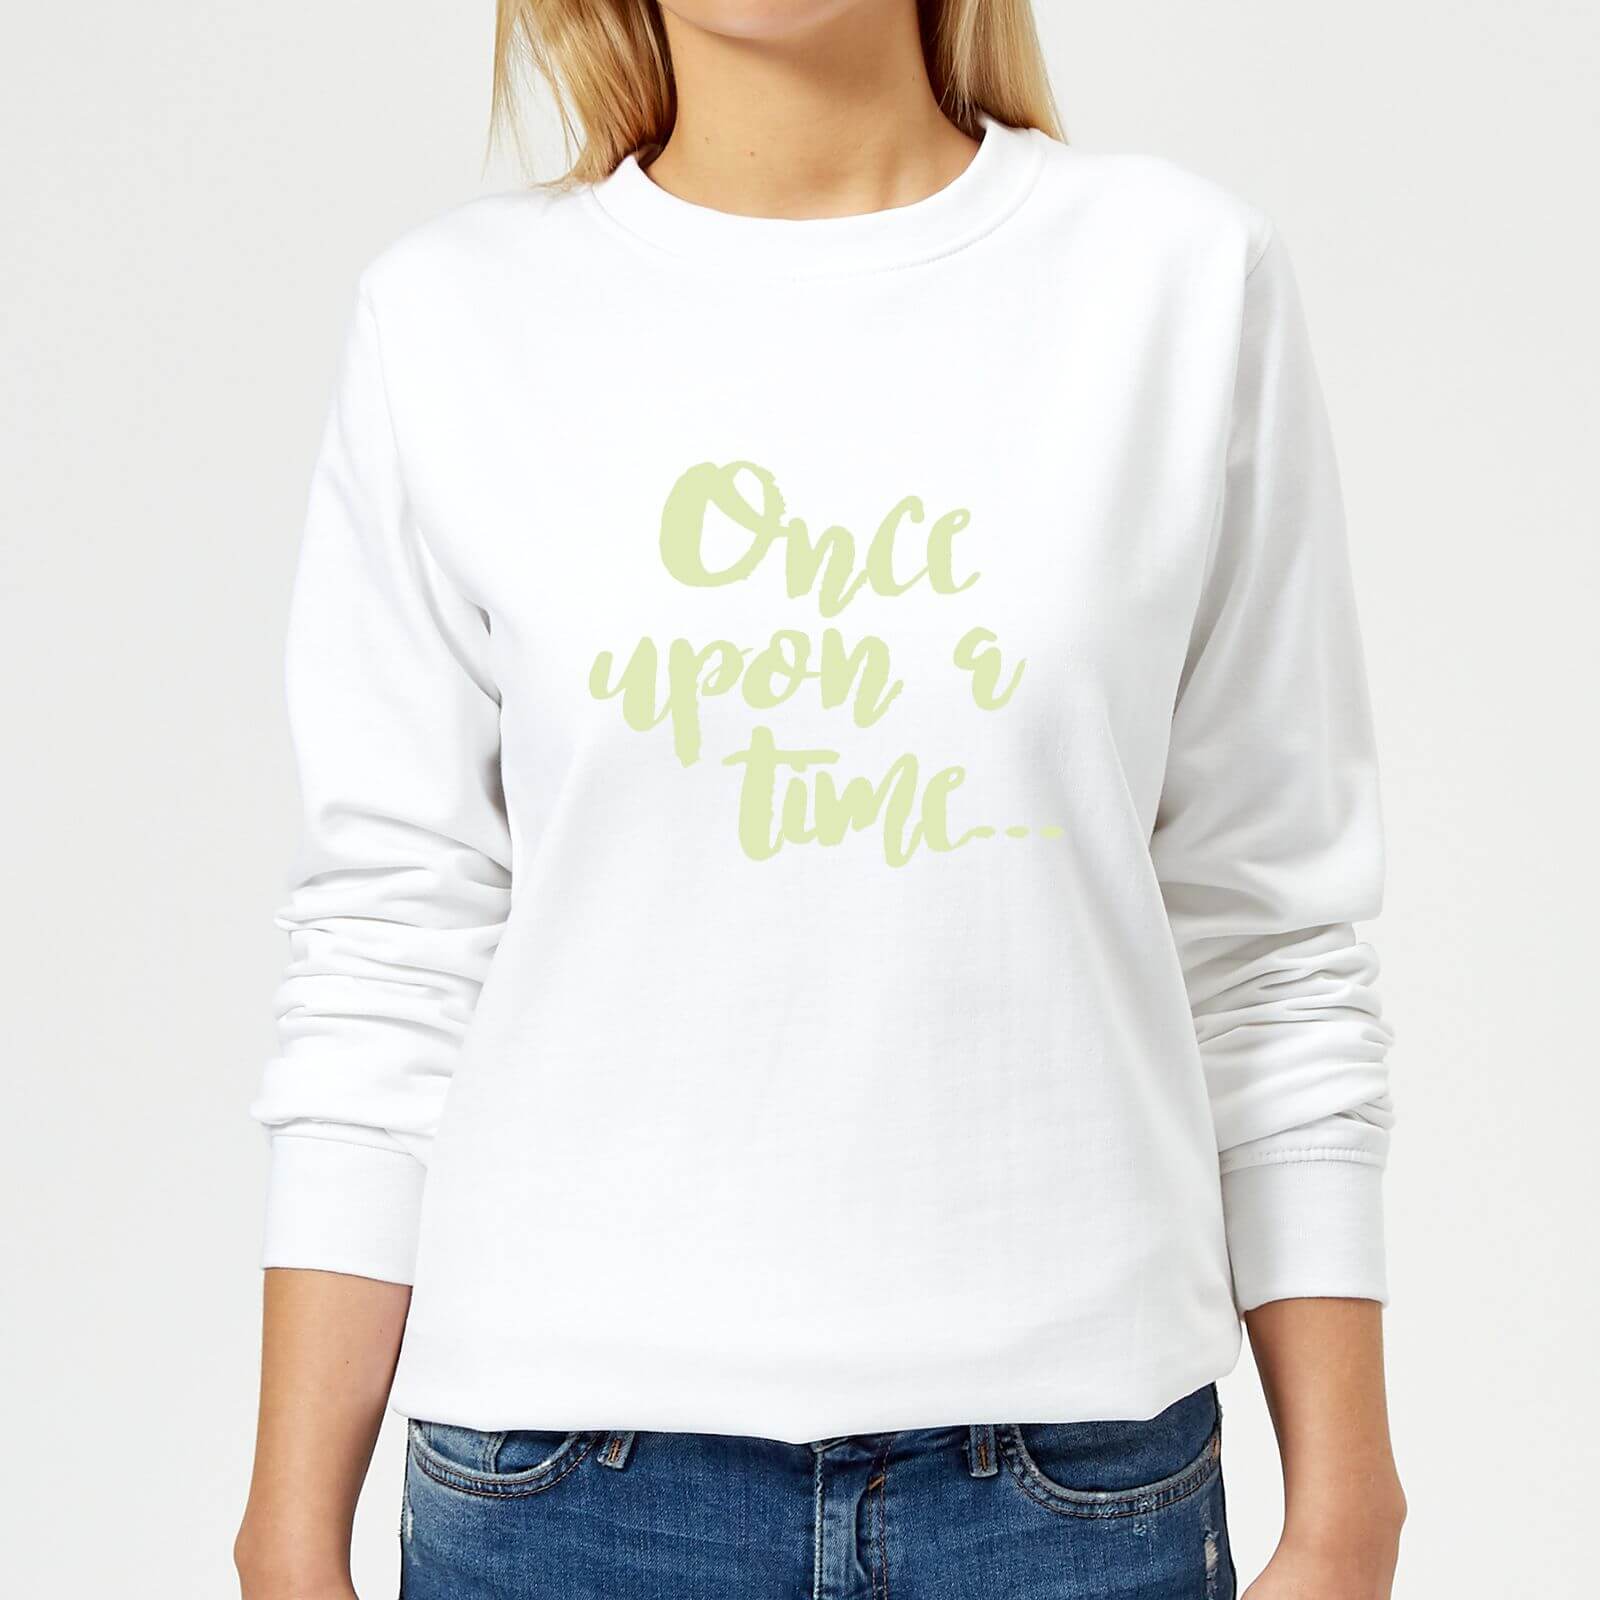 Once Upon A Time Women's Sweatshirt - White - L - White